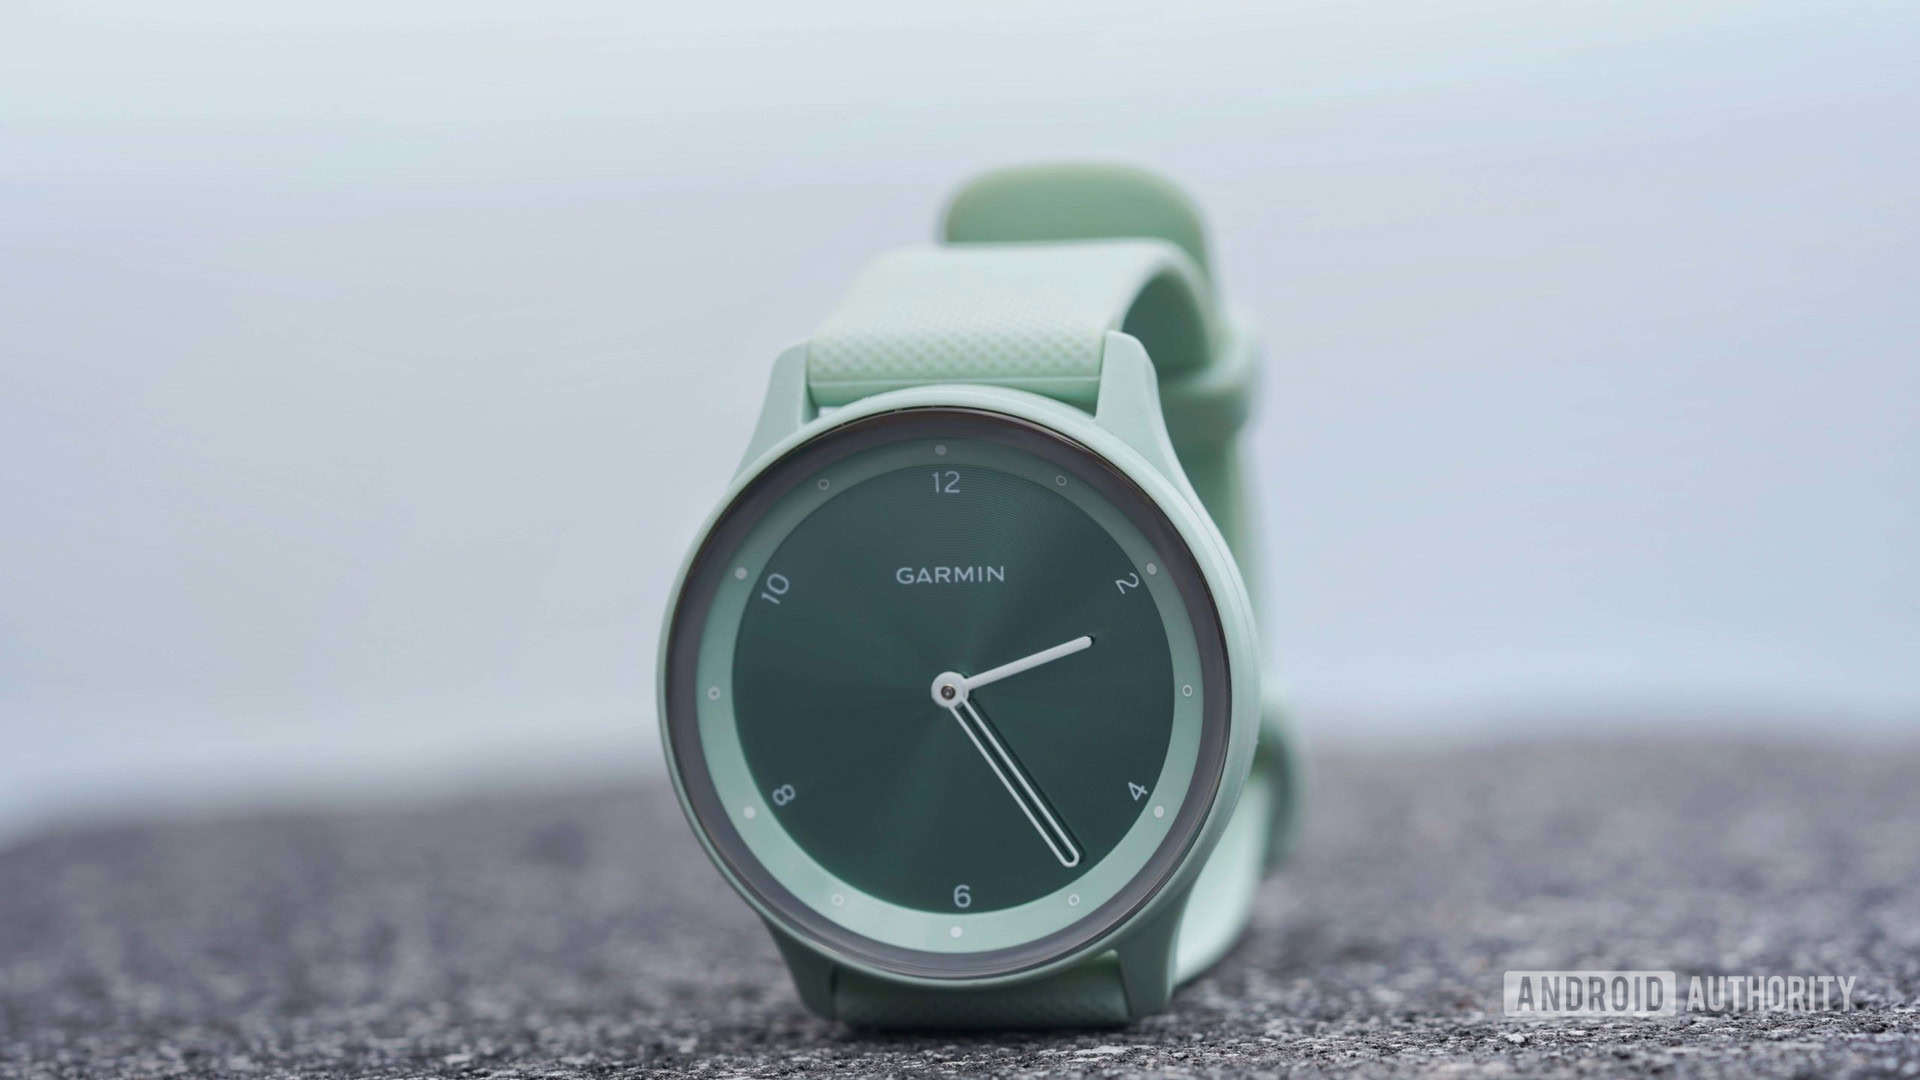 vivomove review: The intersection style substance Sport Garmin of and